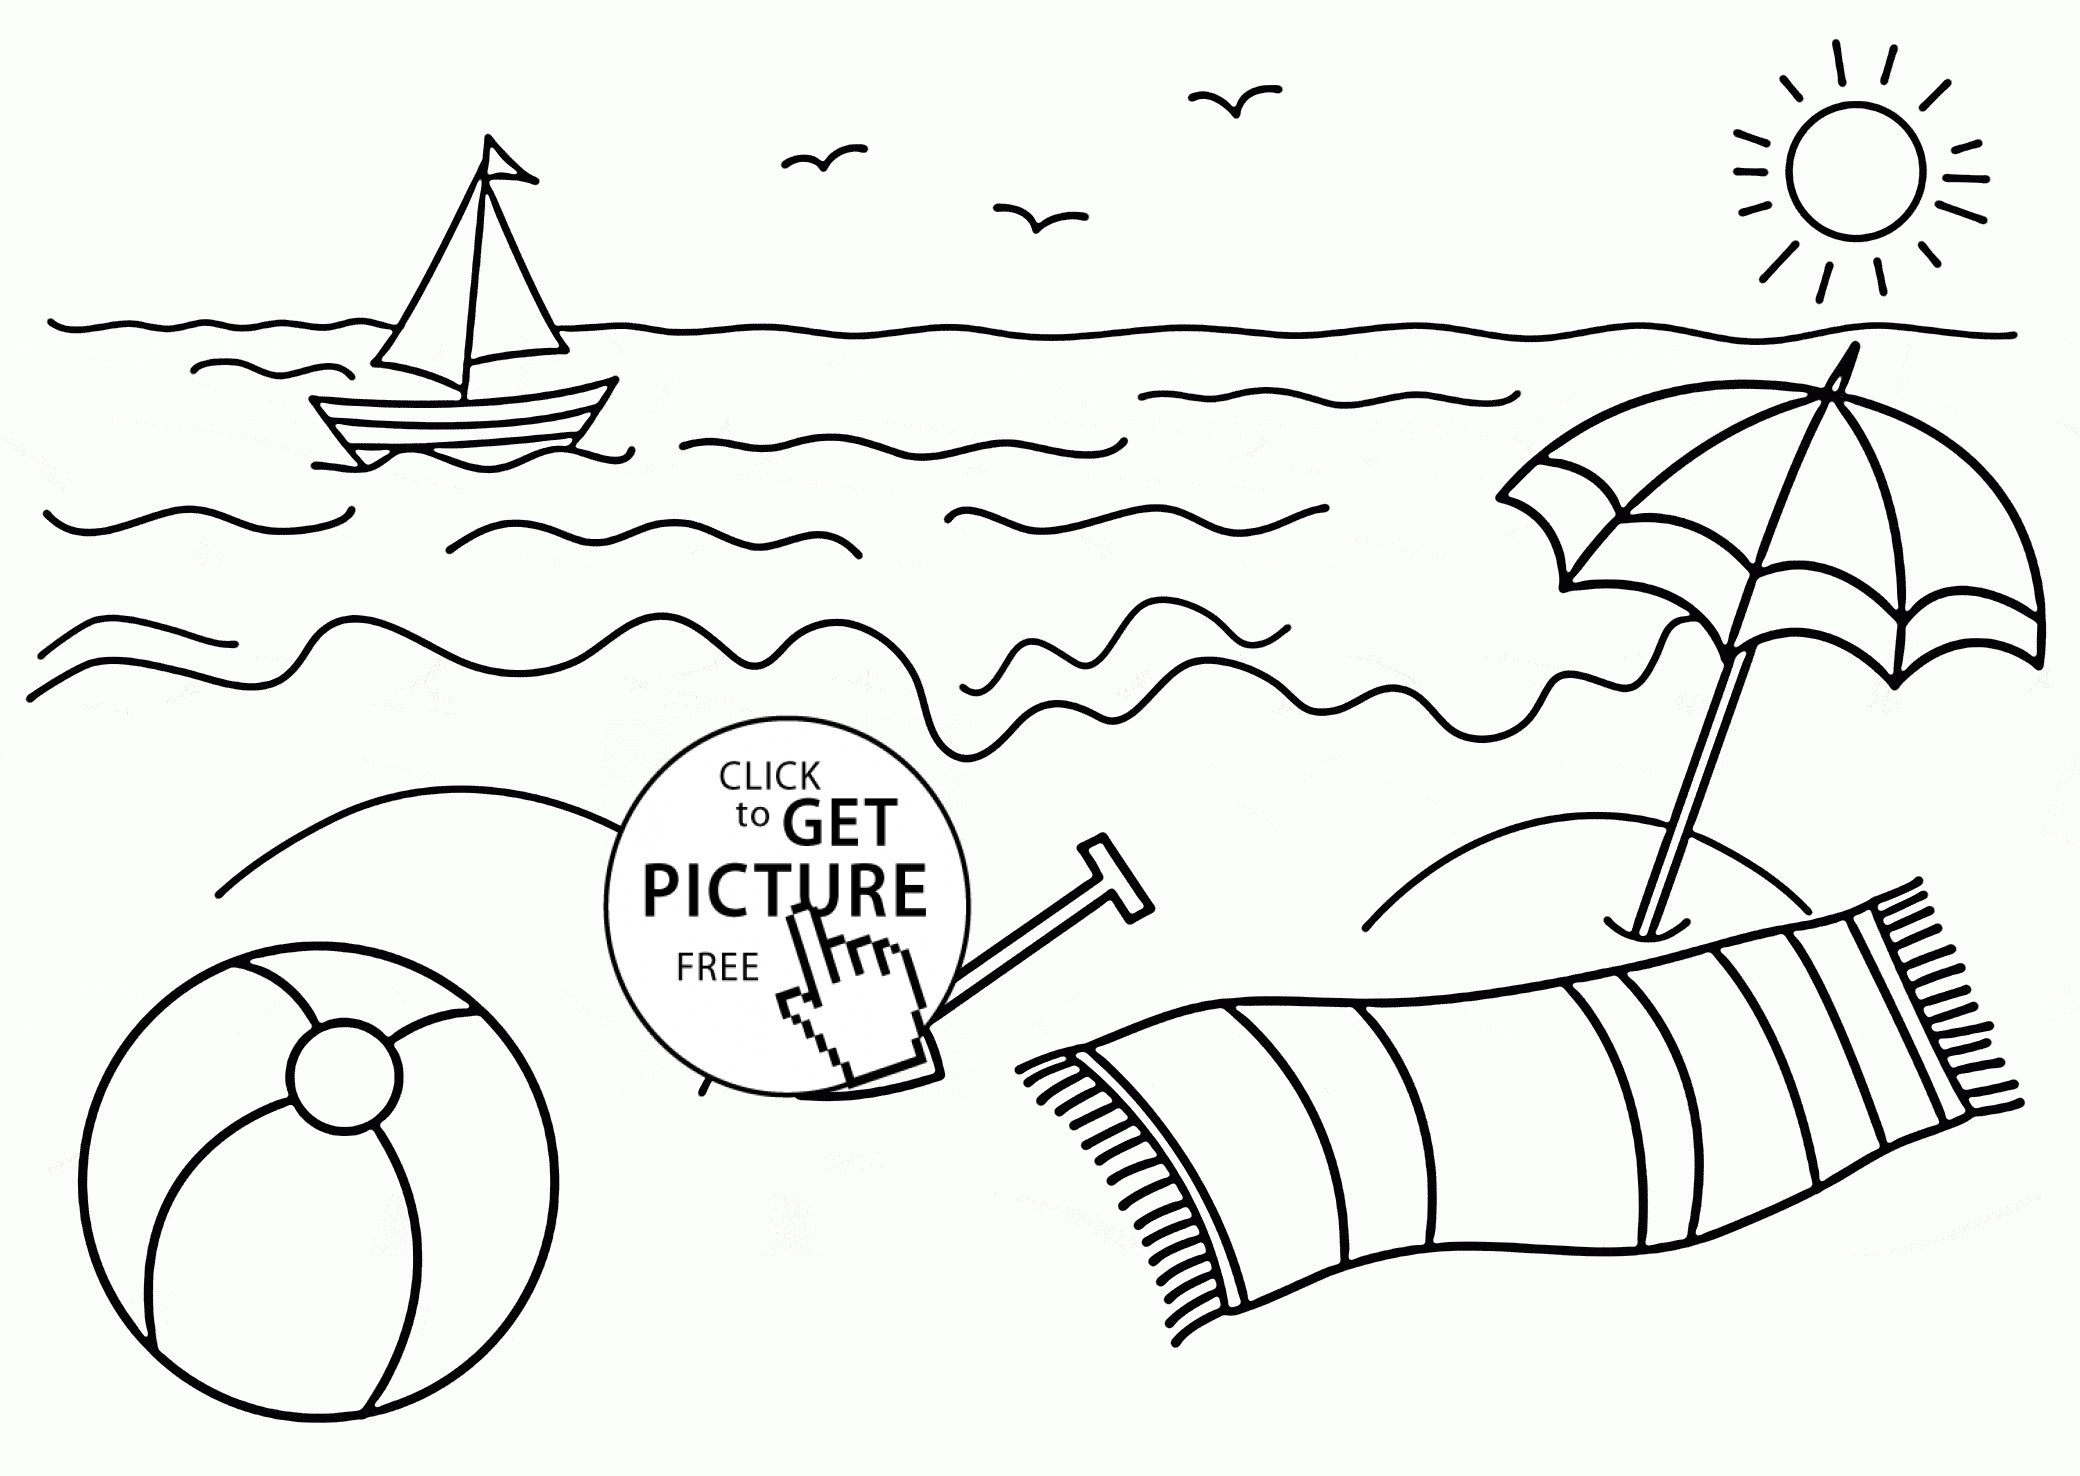 Coloring Pages Beach Theme New Free Printable Beach Coloring Pages - Free Printable Beach Coloring Pages